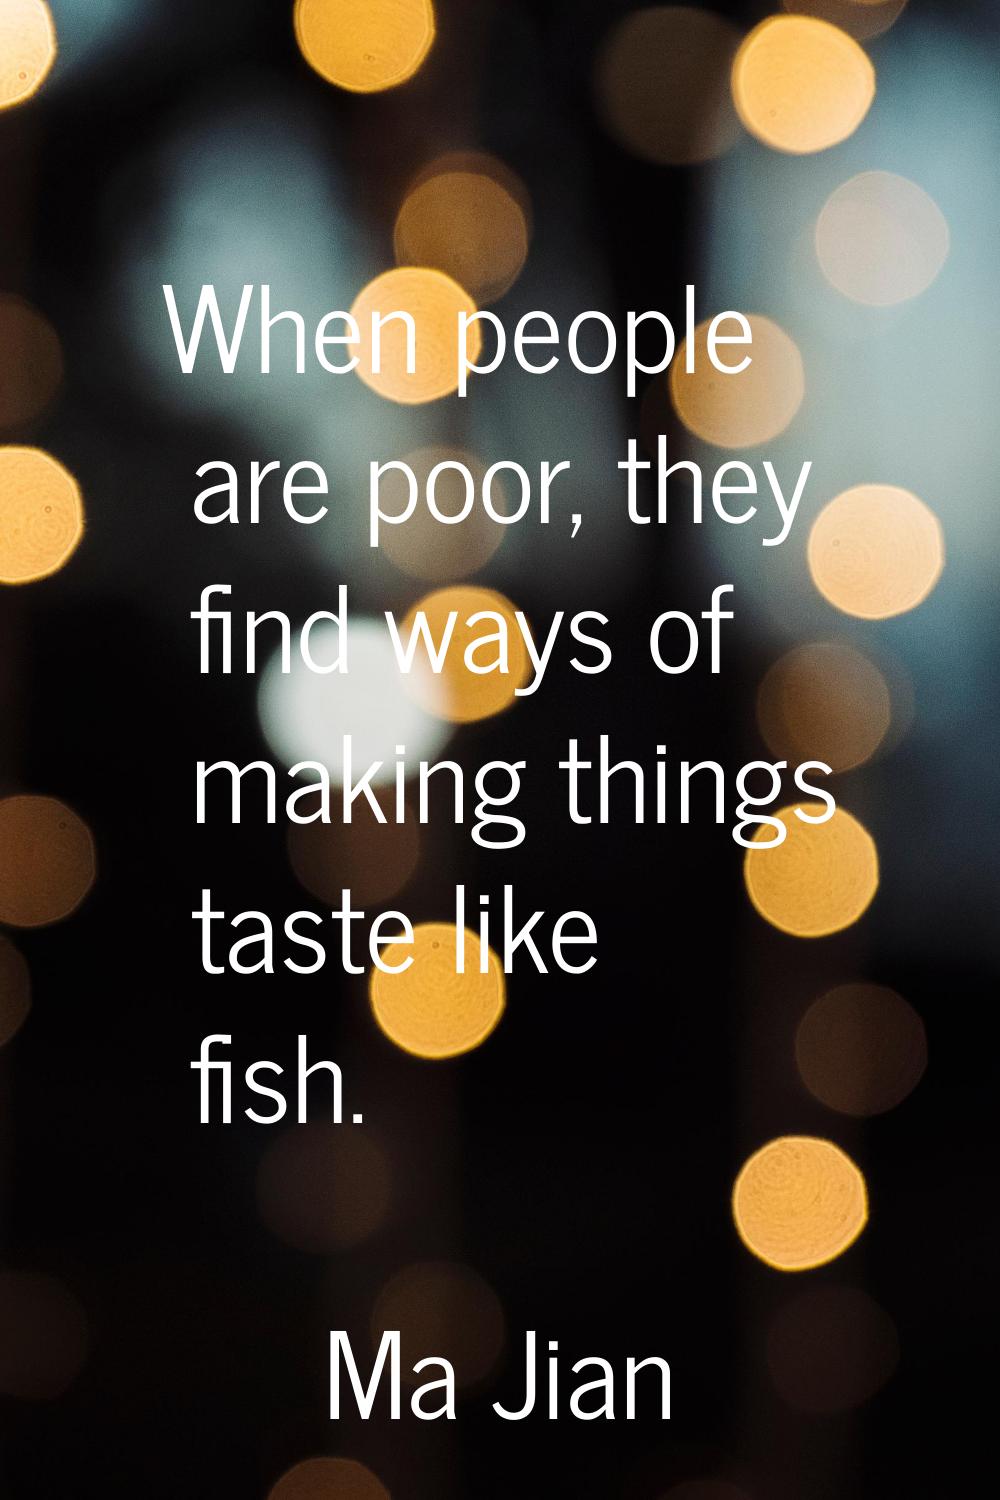 When people are poor, they find ways of making things taste like fish.